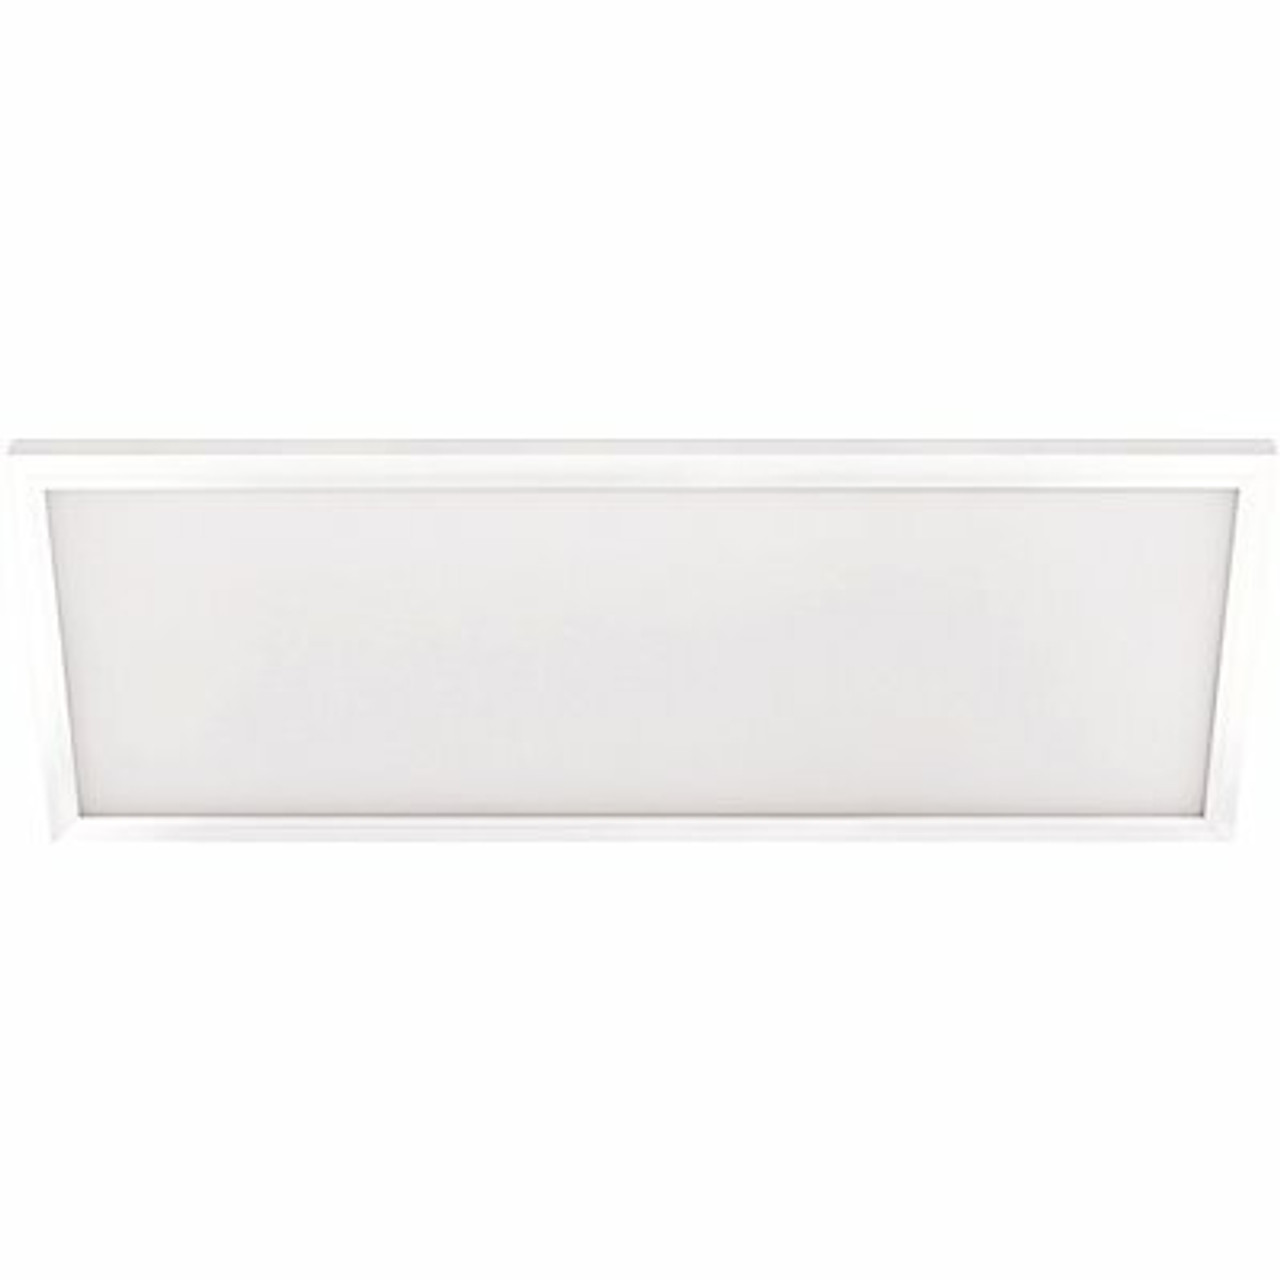 Feit Electric 1 Ft. X 4 Ft. 50-Watt Dimmable White Integrated Led 4 Way Color Edge-Lit Flat Panel Ceiling Flushmount